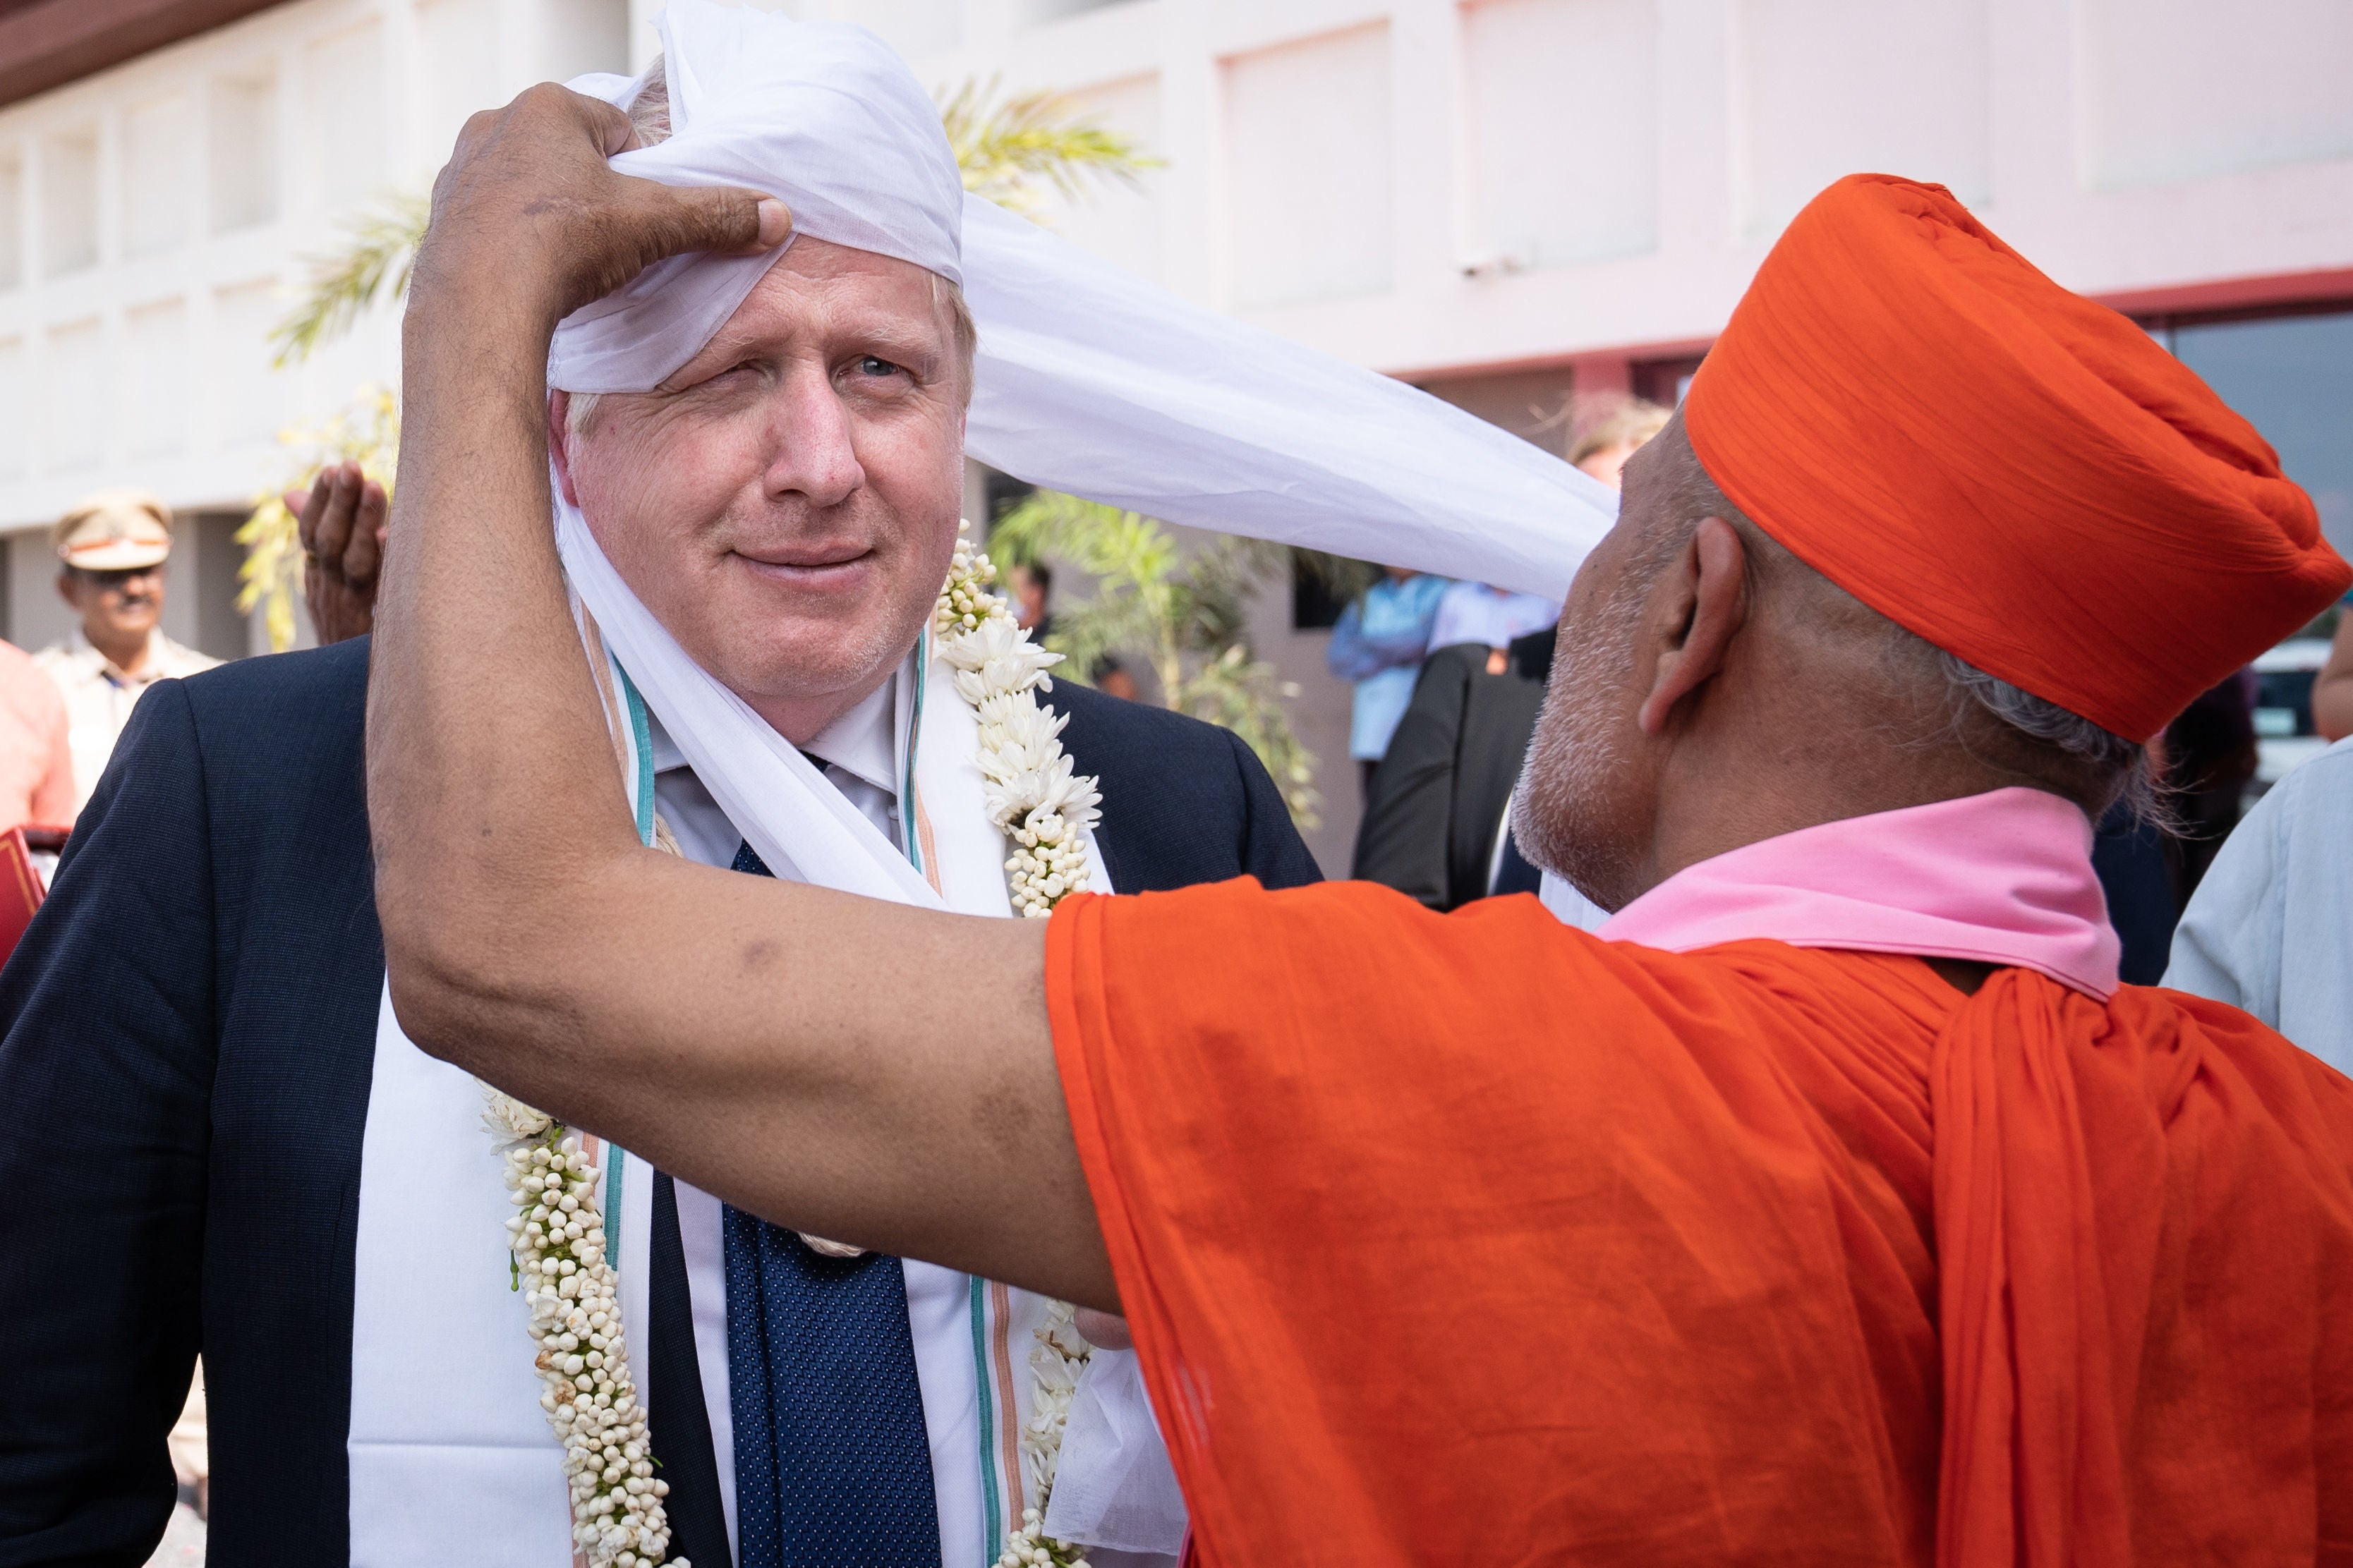 The PM having a turban placed on his head at a university in Gujarat, India, on Thursday